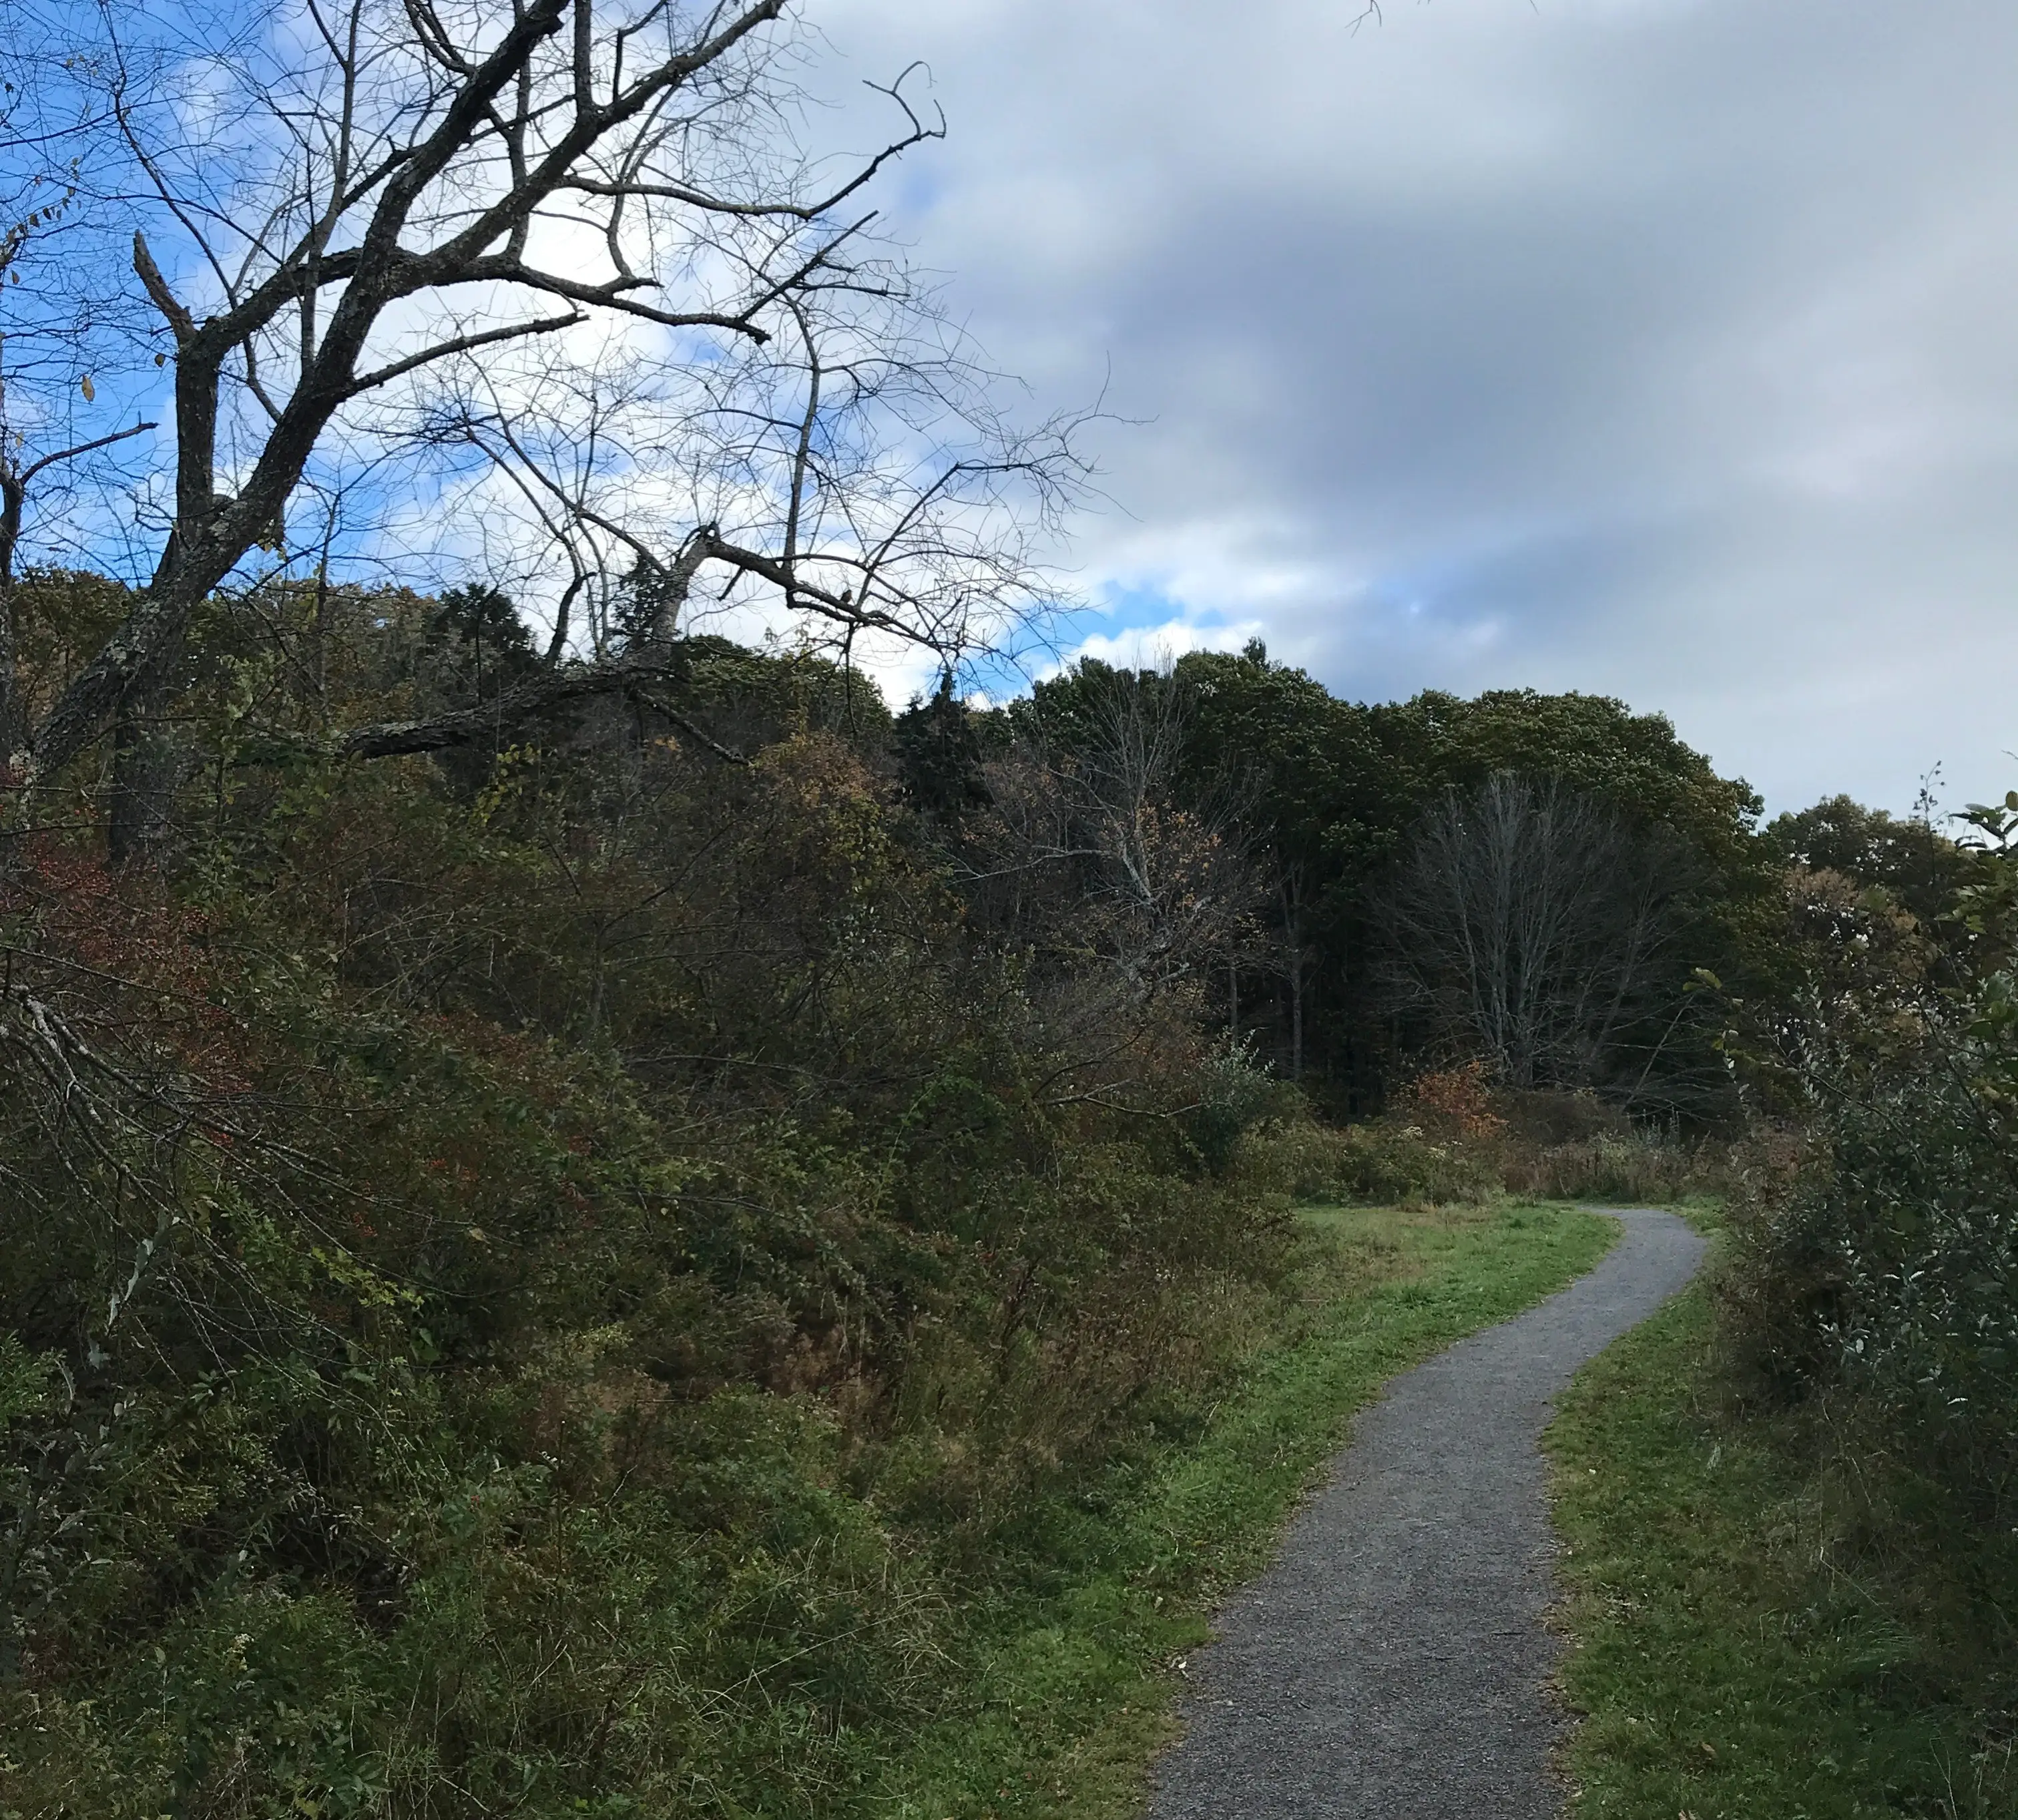 The Pleasant Hill Preserve trail - one of the easiest hiking trails around Portland, Maine.